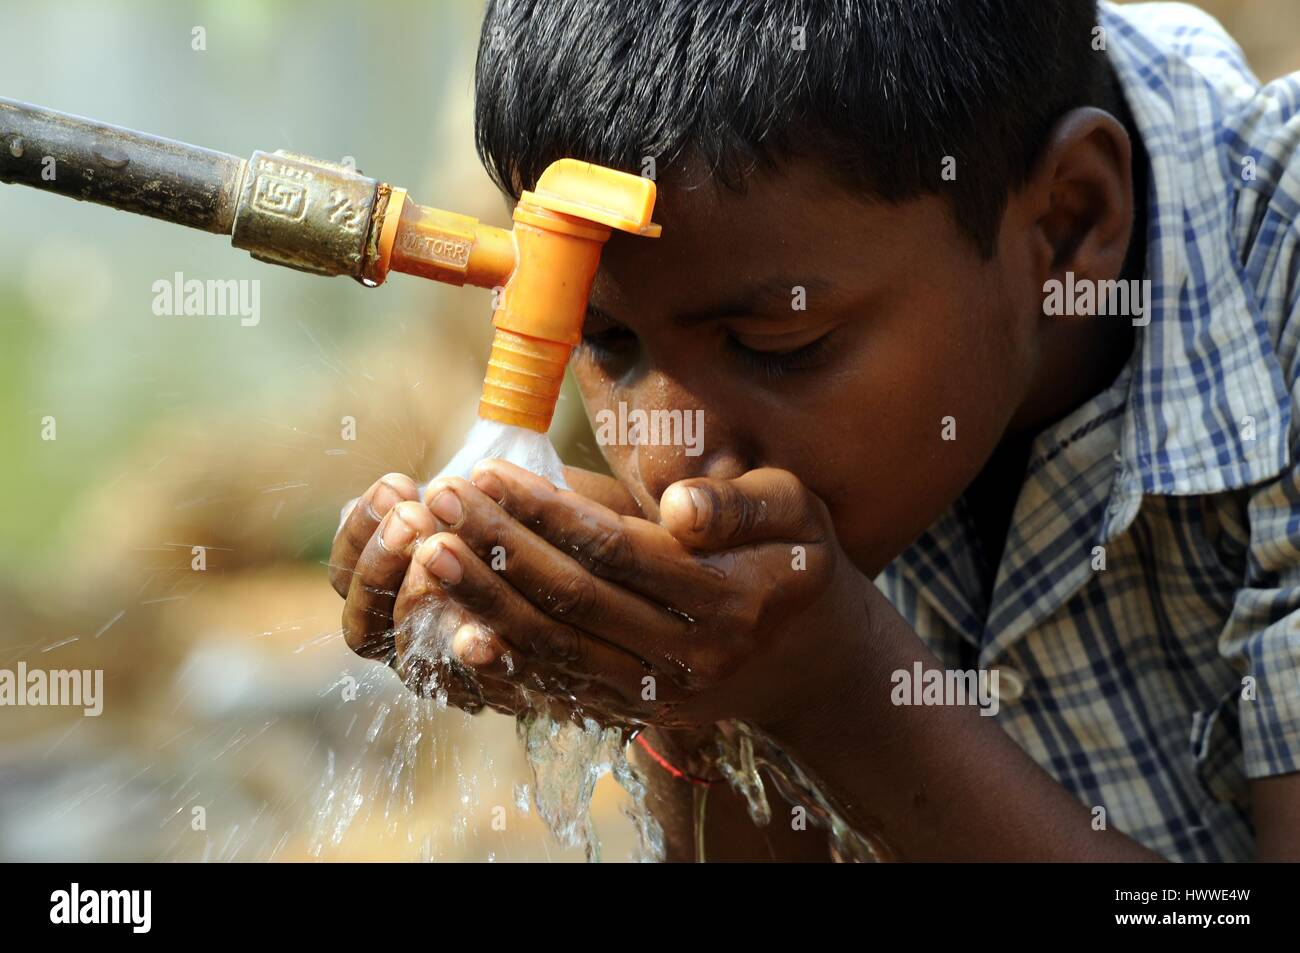 World Water Day in India -  21/03/2017  -  India / Tripura / Agartala  -  An Indian school children drinks water from a water supply line on the eve of World water day at Raimura village, on the outskirts of Agartala, the capital of northeastern state of Tripura on March 21, 2017. World Water Day is observed on March 22 every year.   -  Abhisek Saha / Le Pictorium Stock Photo